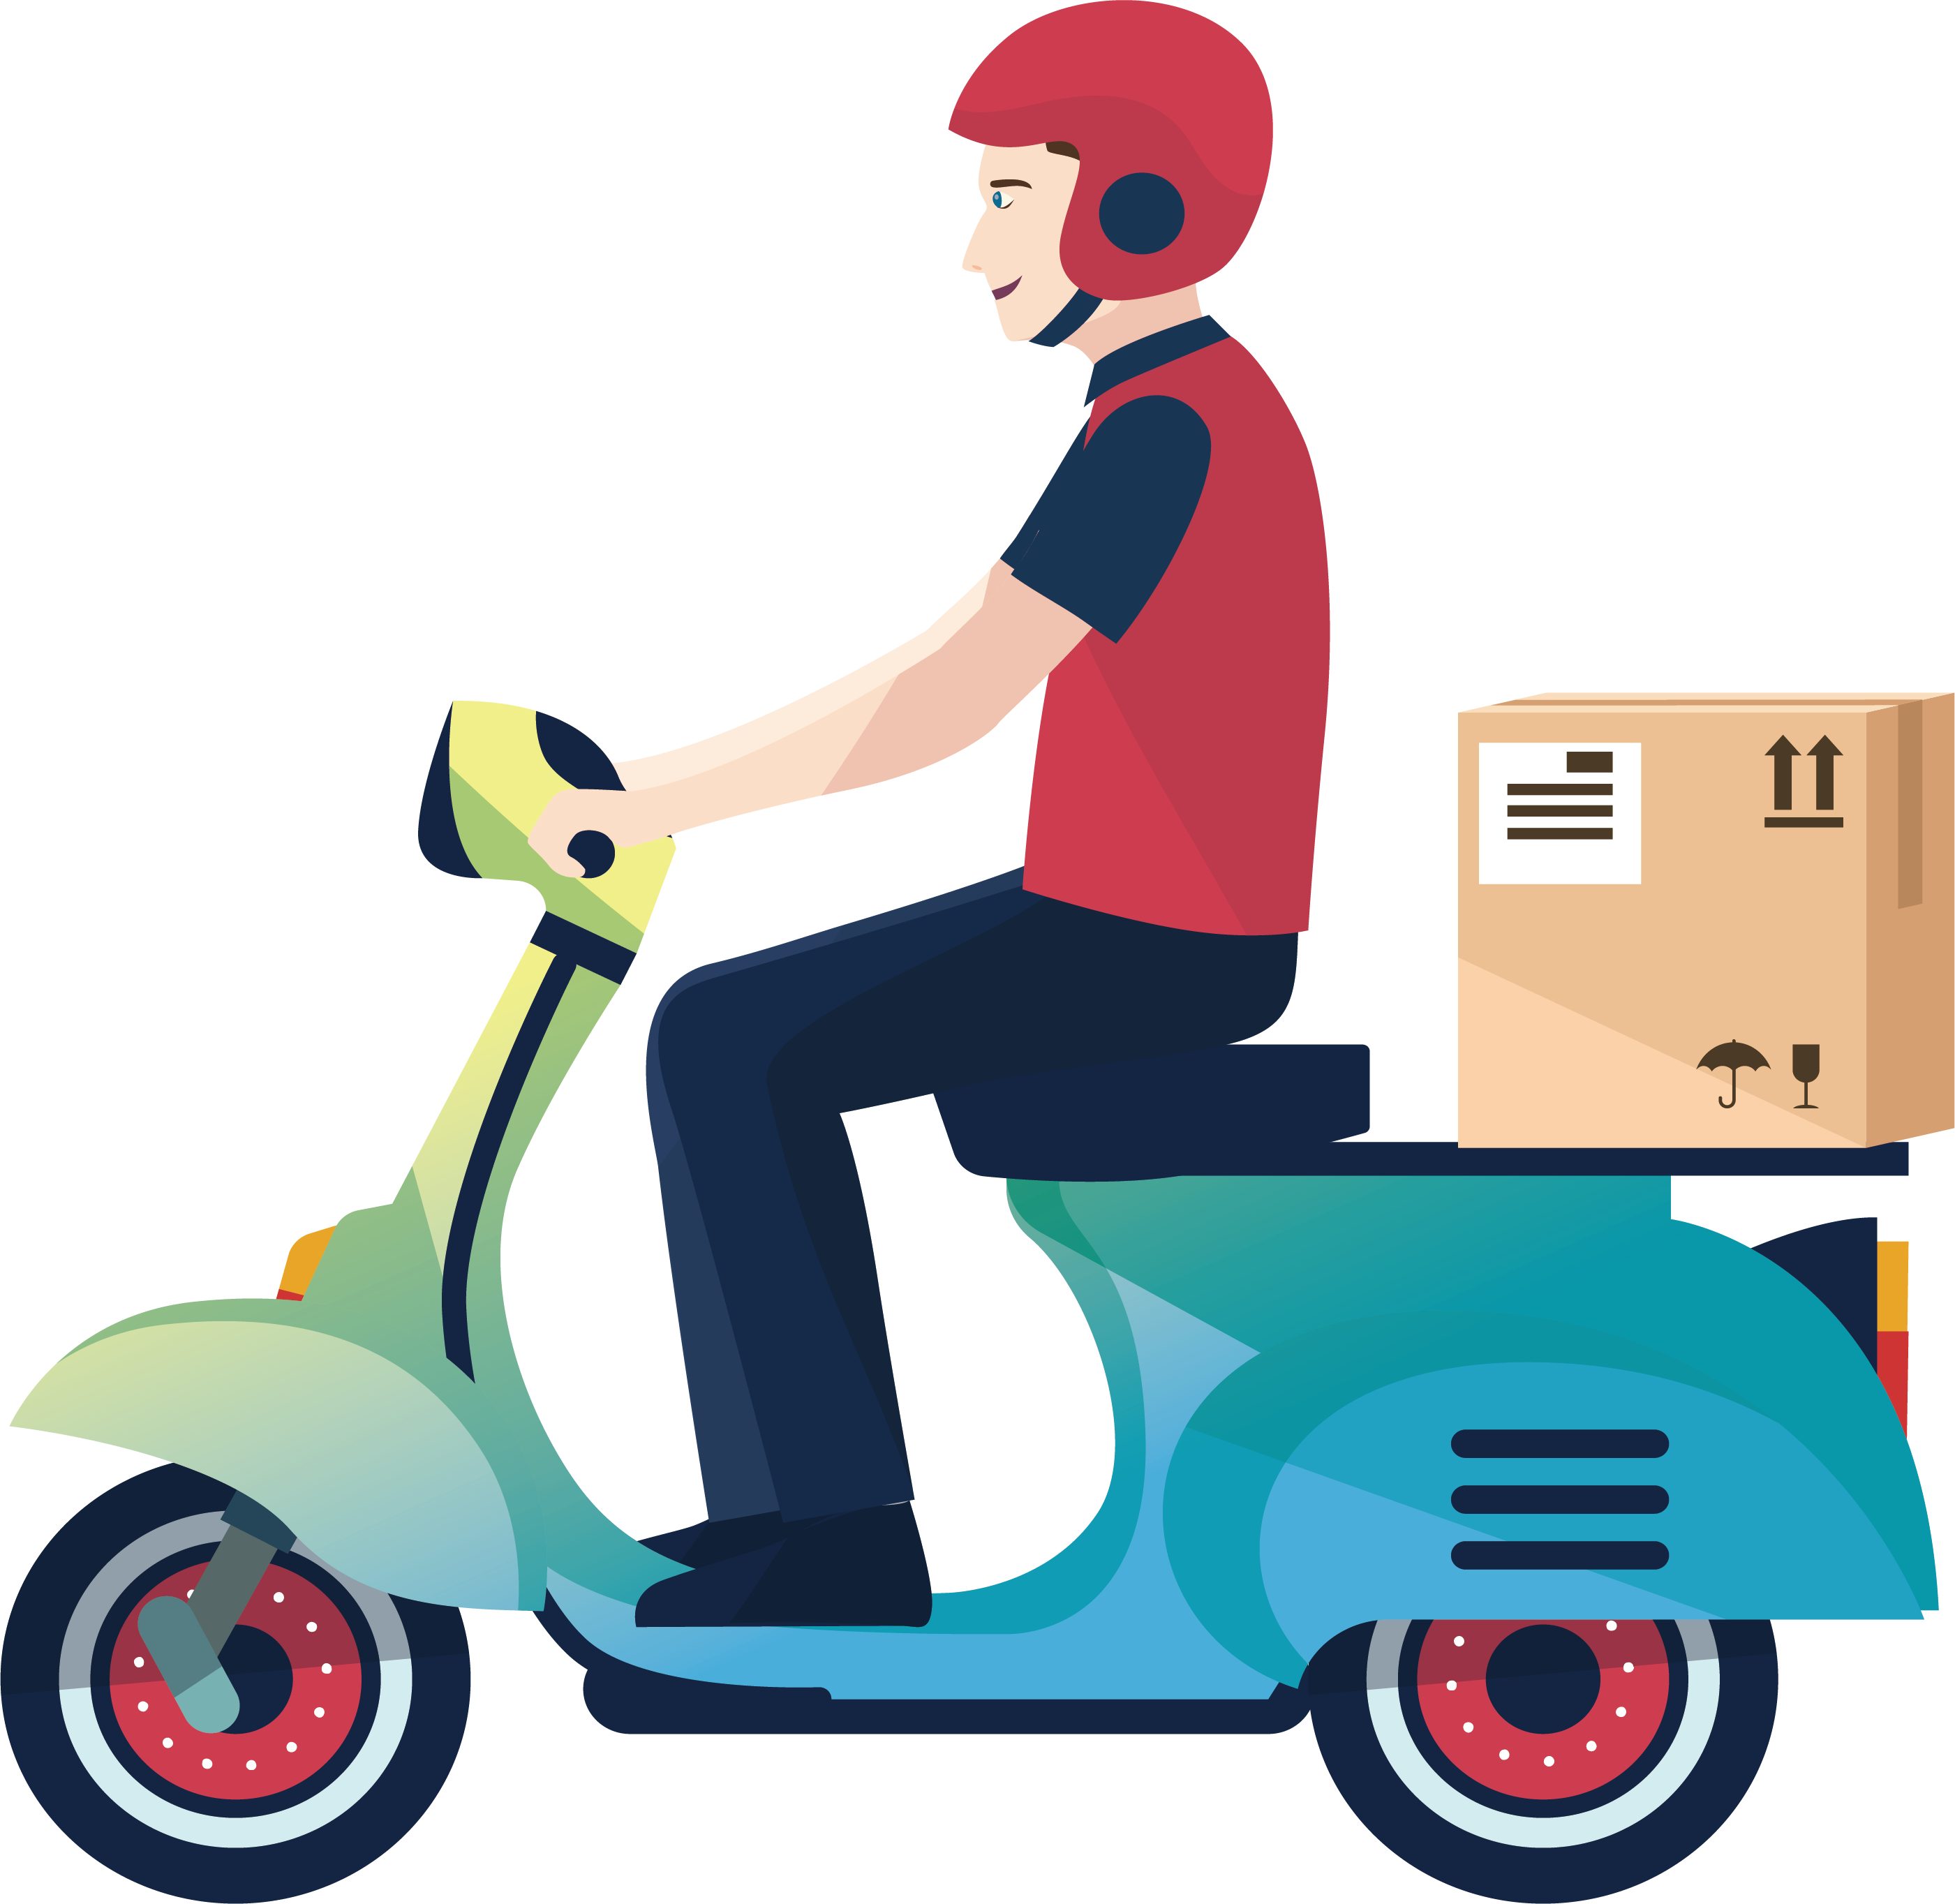 Logistics Courier Service Delivery Motorcycle Man Clipart